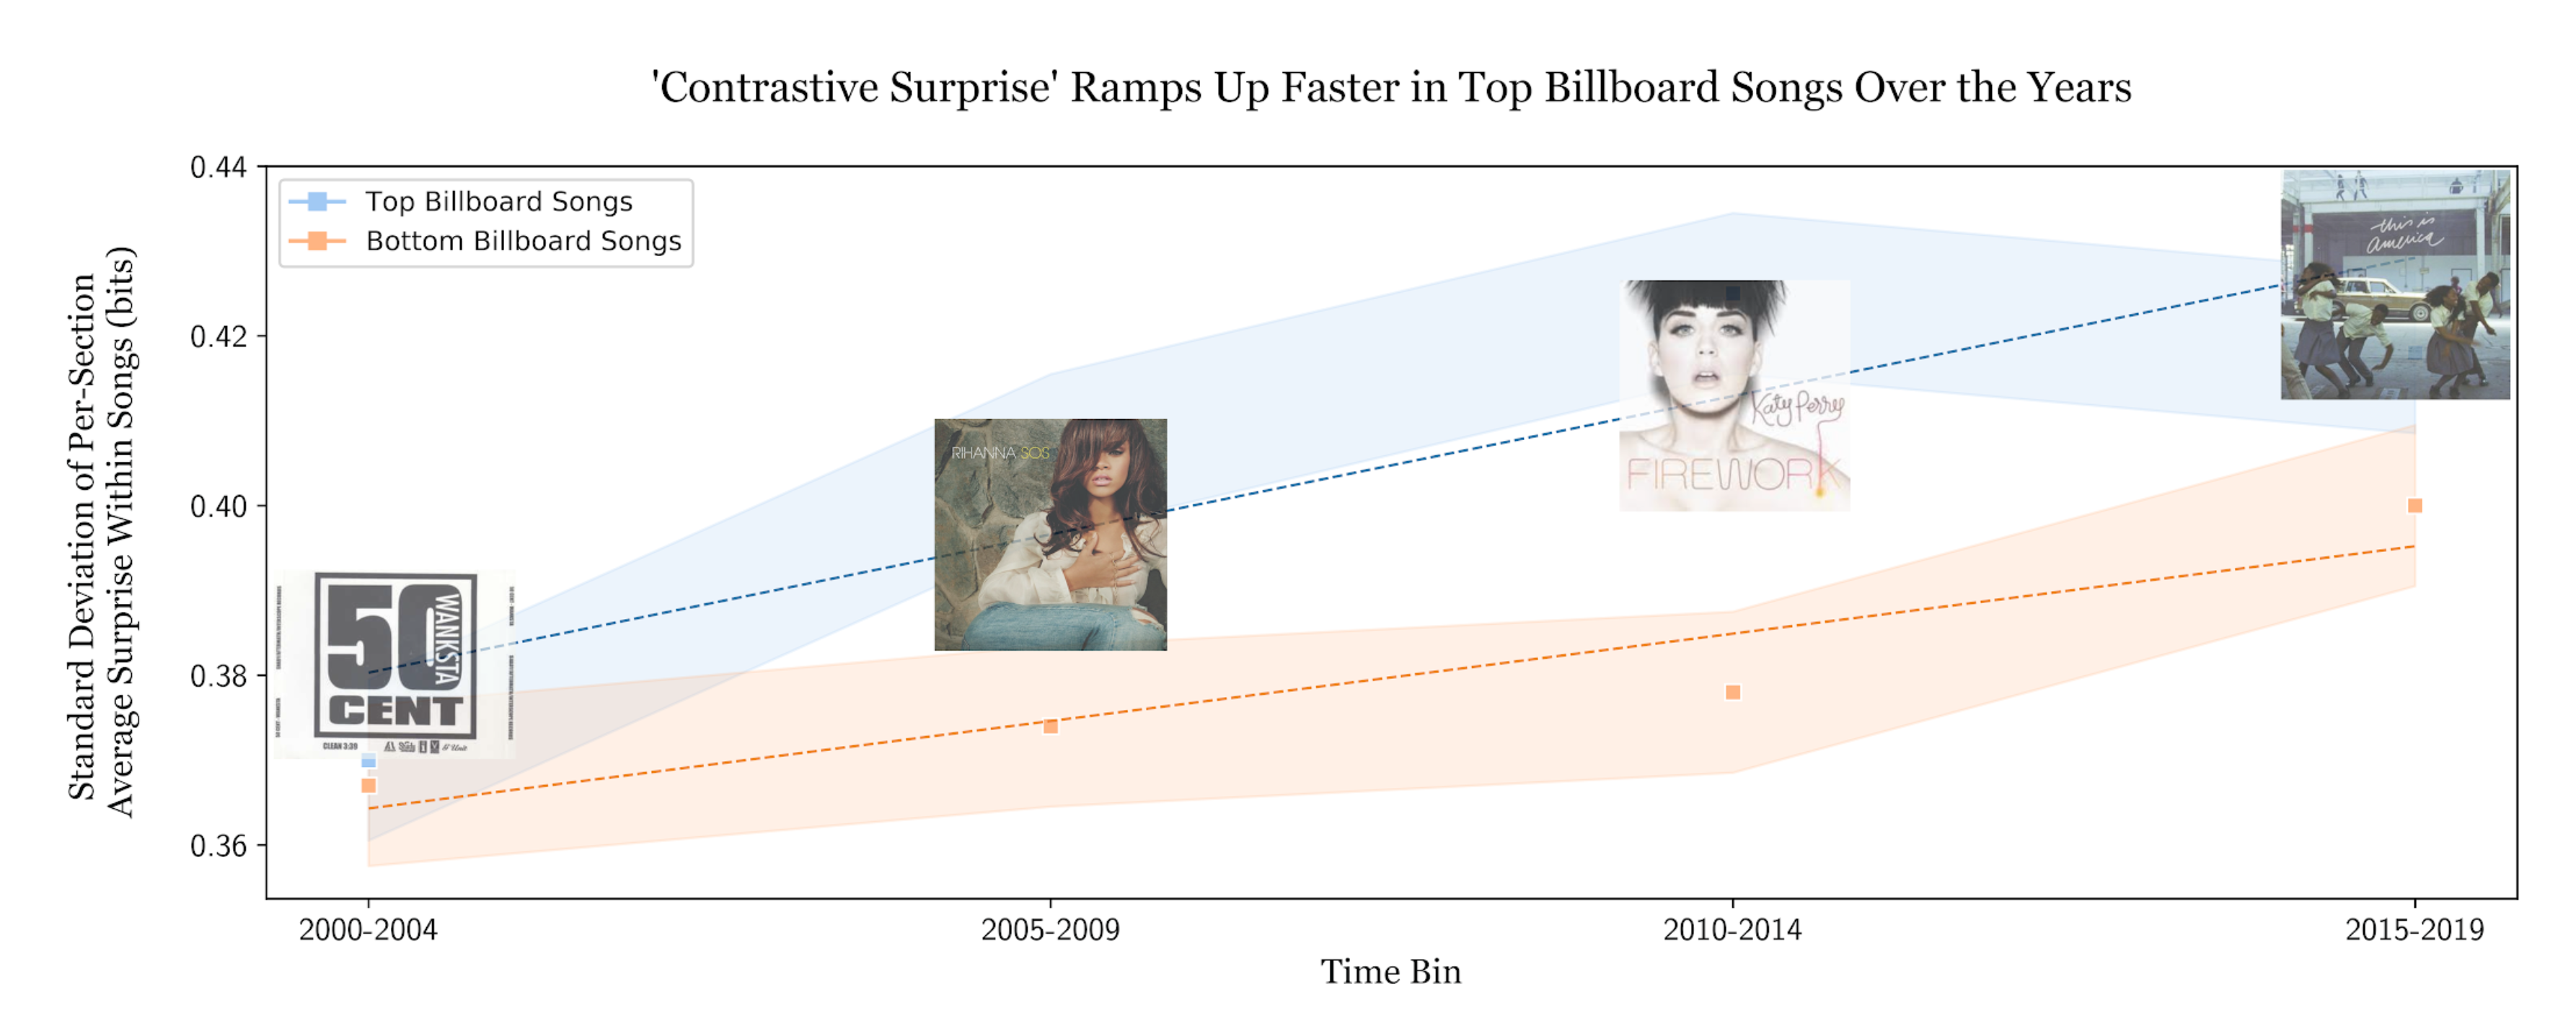 Over 20 years, top-performing songs were shown to increase their level of harmonic surprise at a faster rate than bottom-performing songs. 